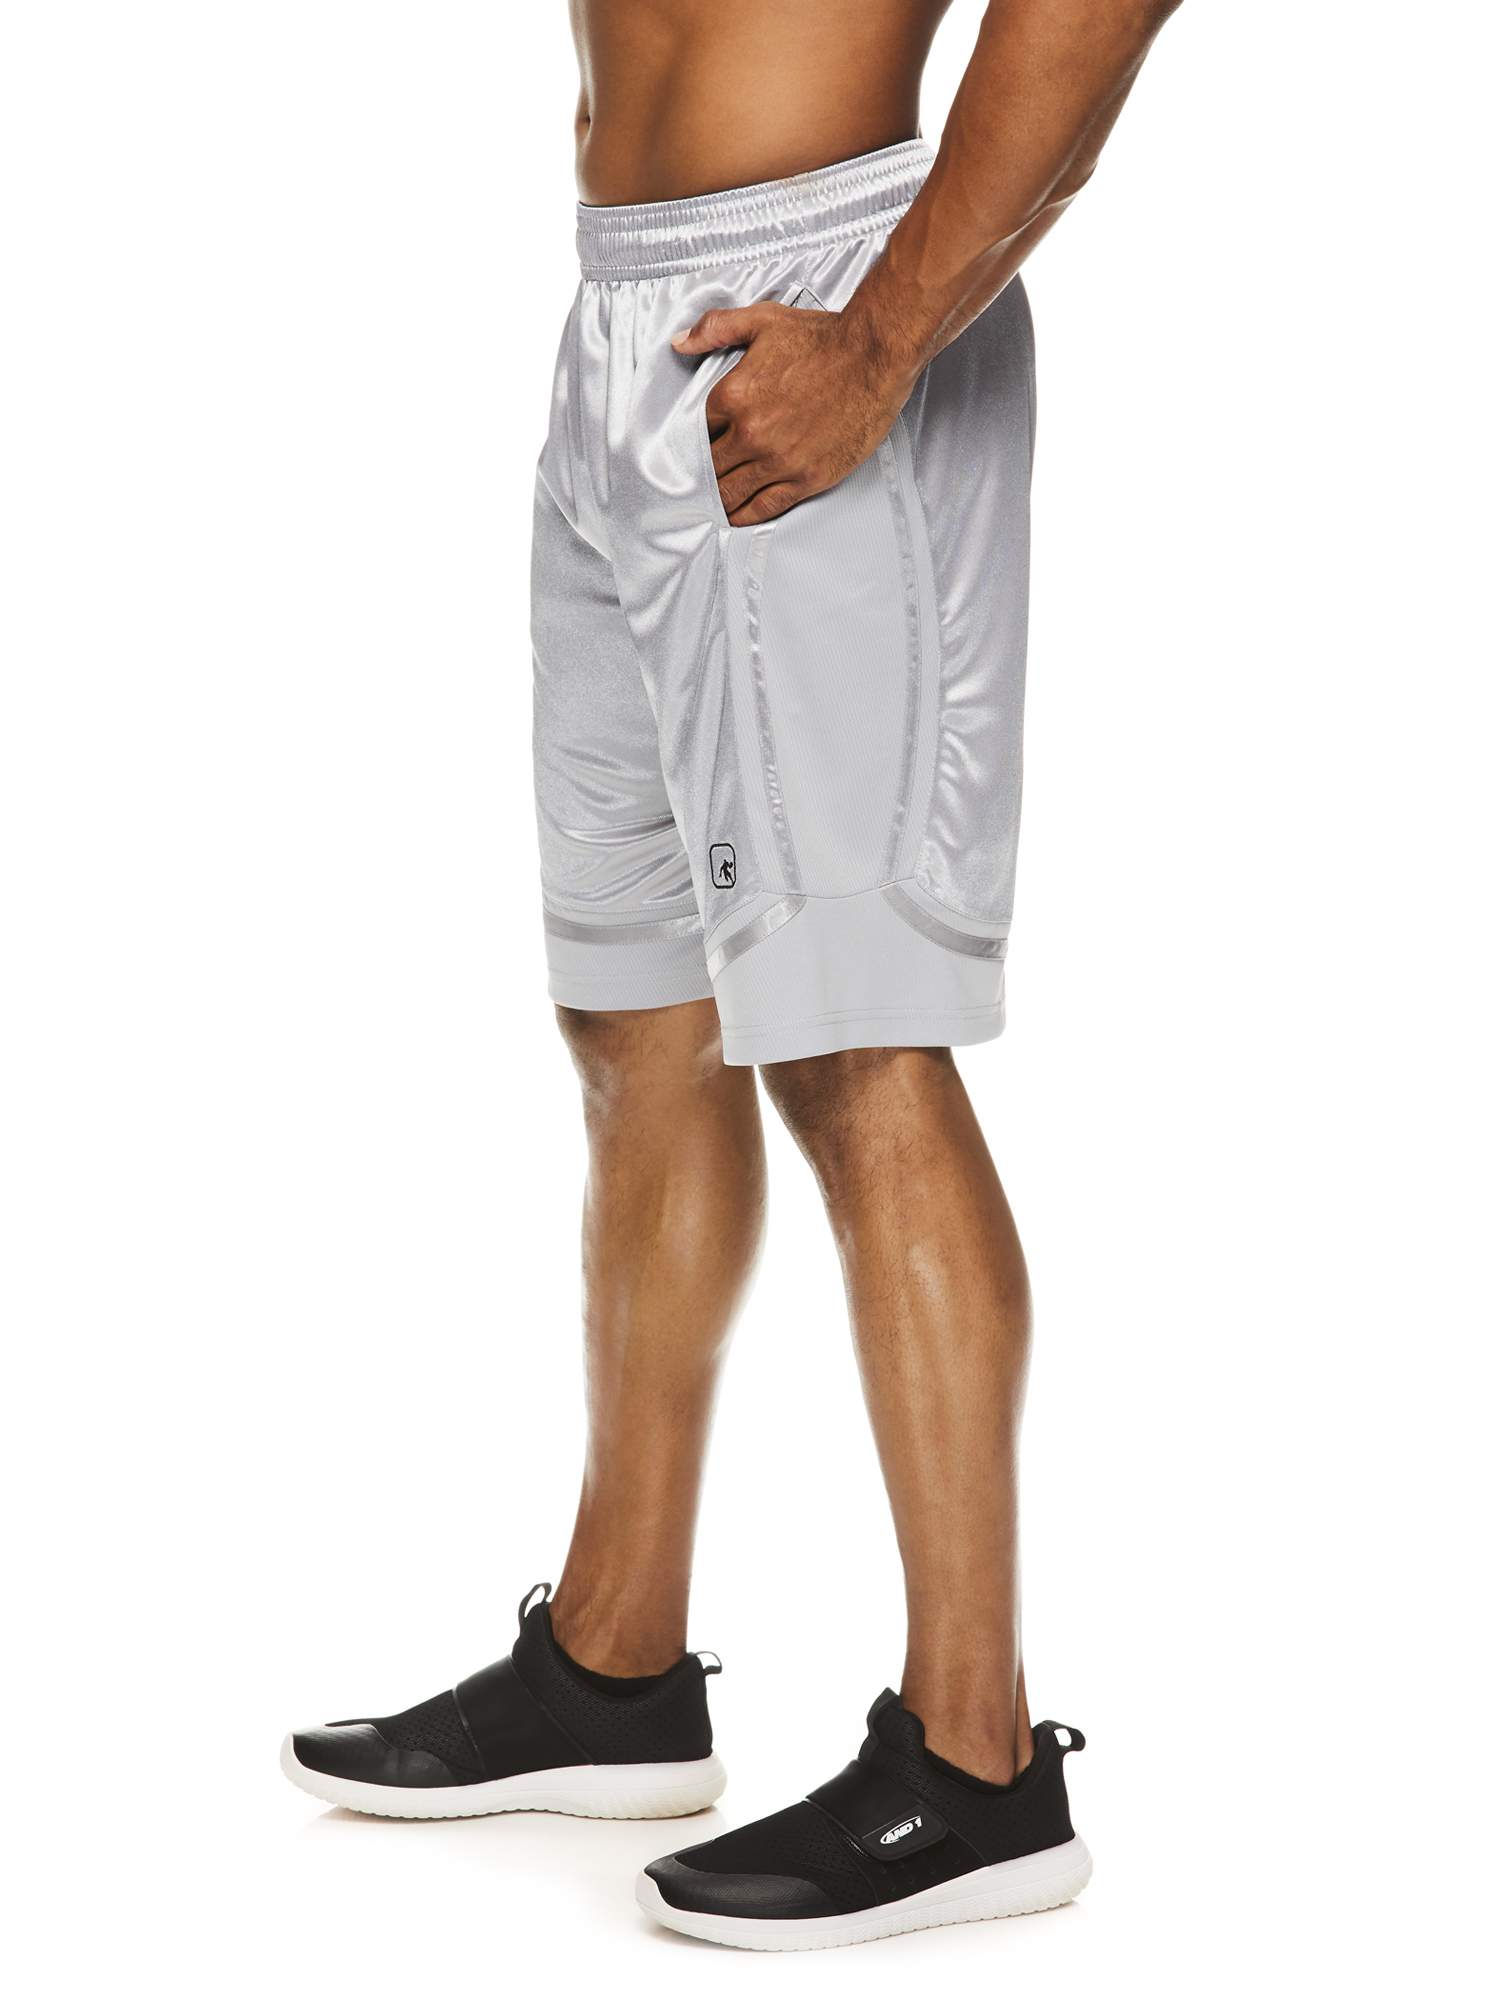 AND1 Men's and Big Men's Active Core 11" Home Court Basketball Shorts, Sizes S-5XL - image 2 of 4